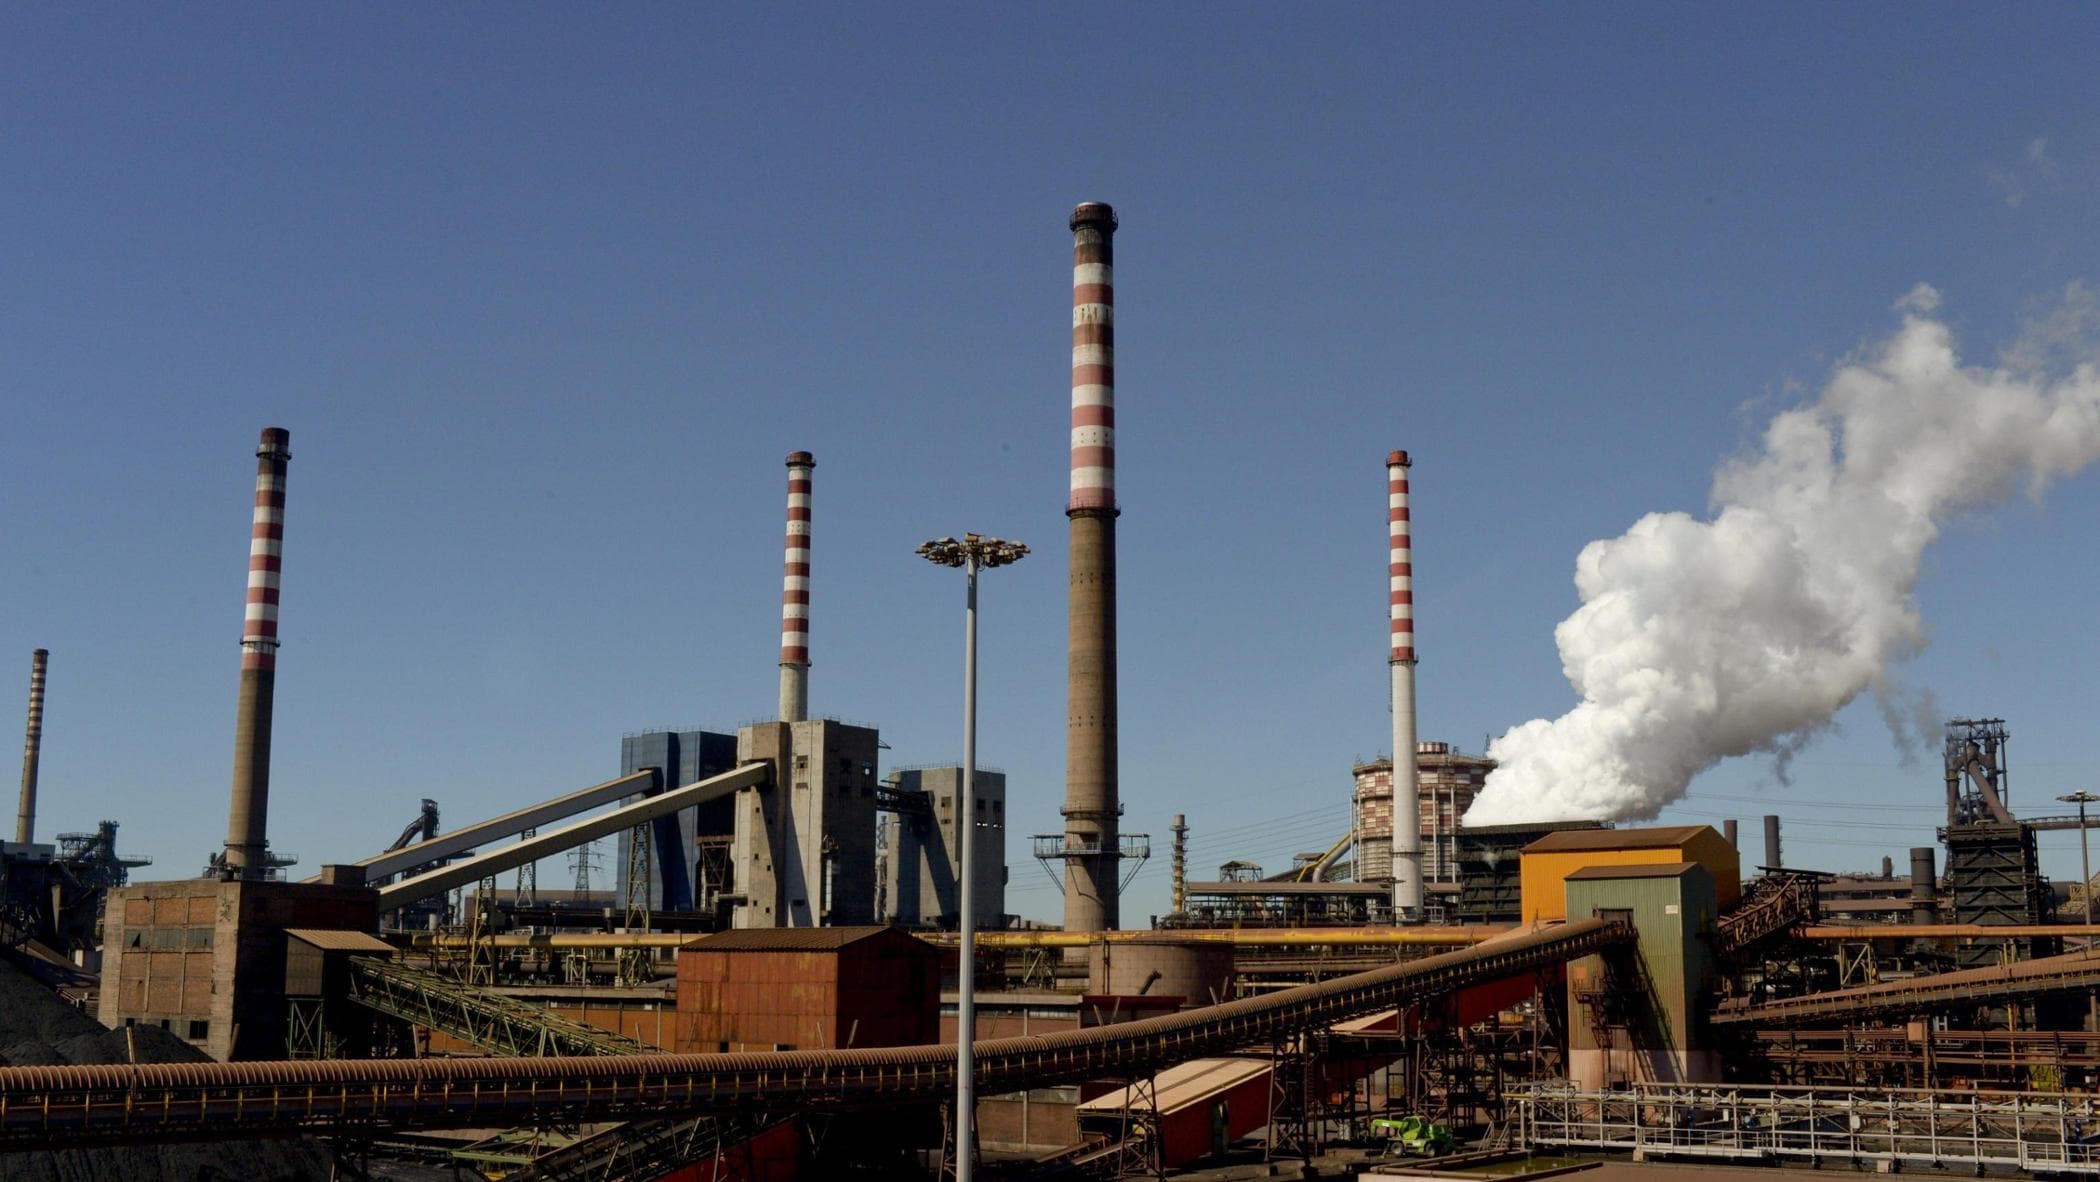 Former Ilva, Taranto fears emergency administration: "It would be a tragedy for creditor companies"